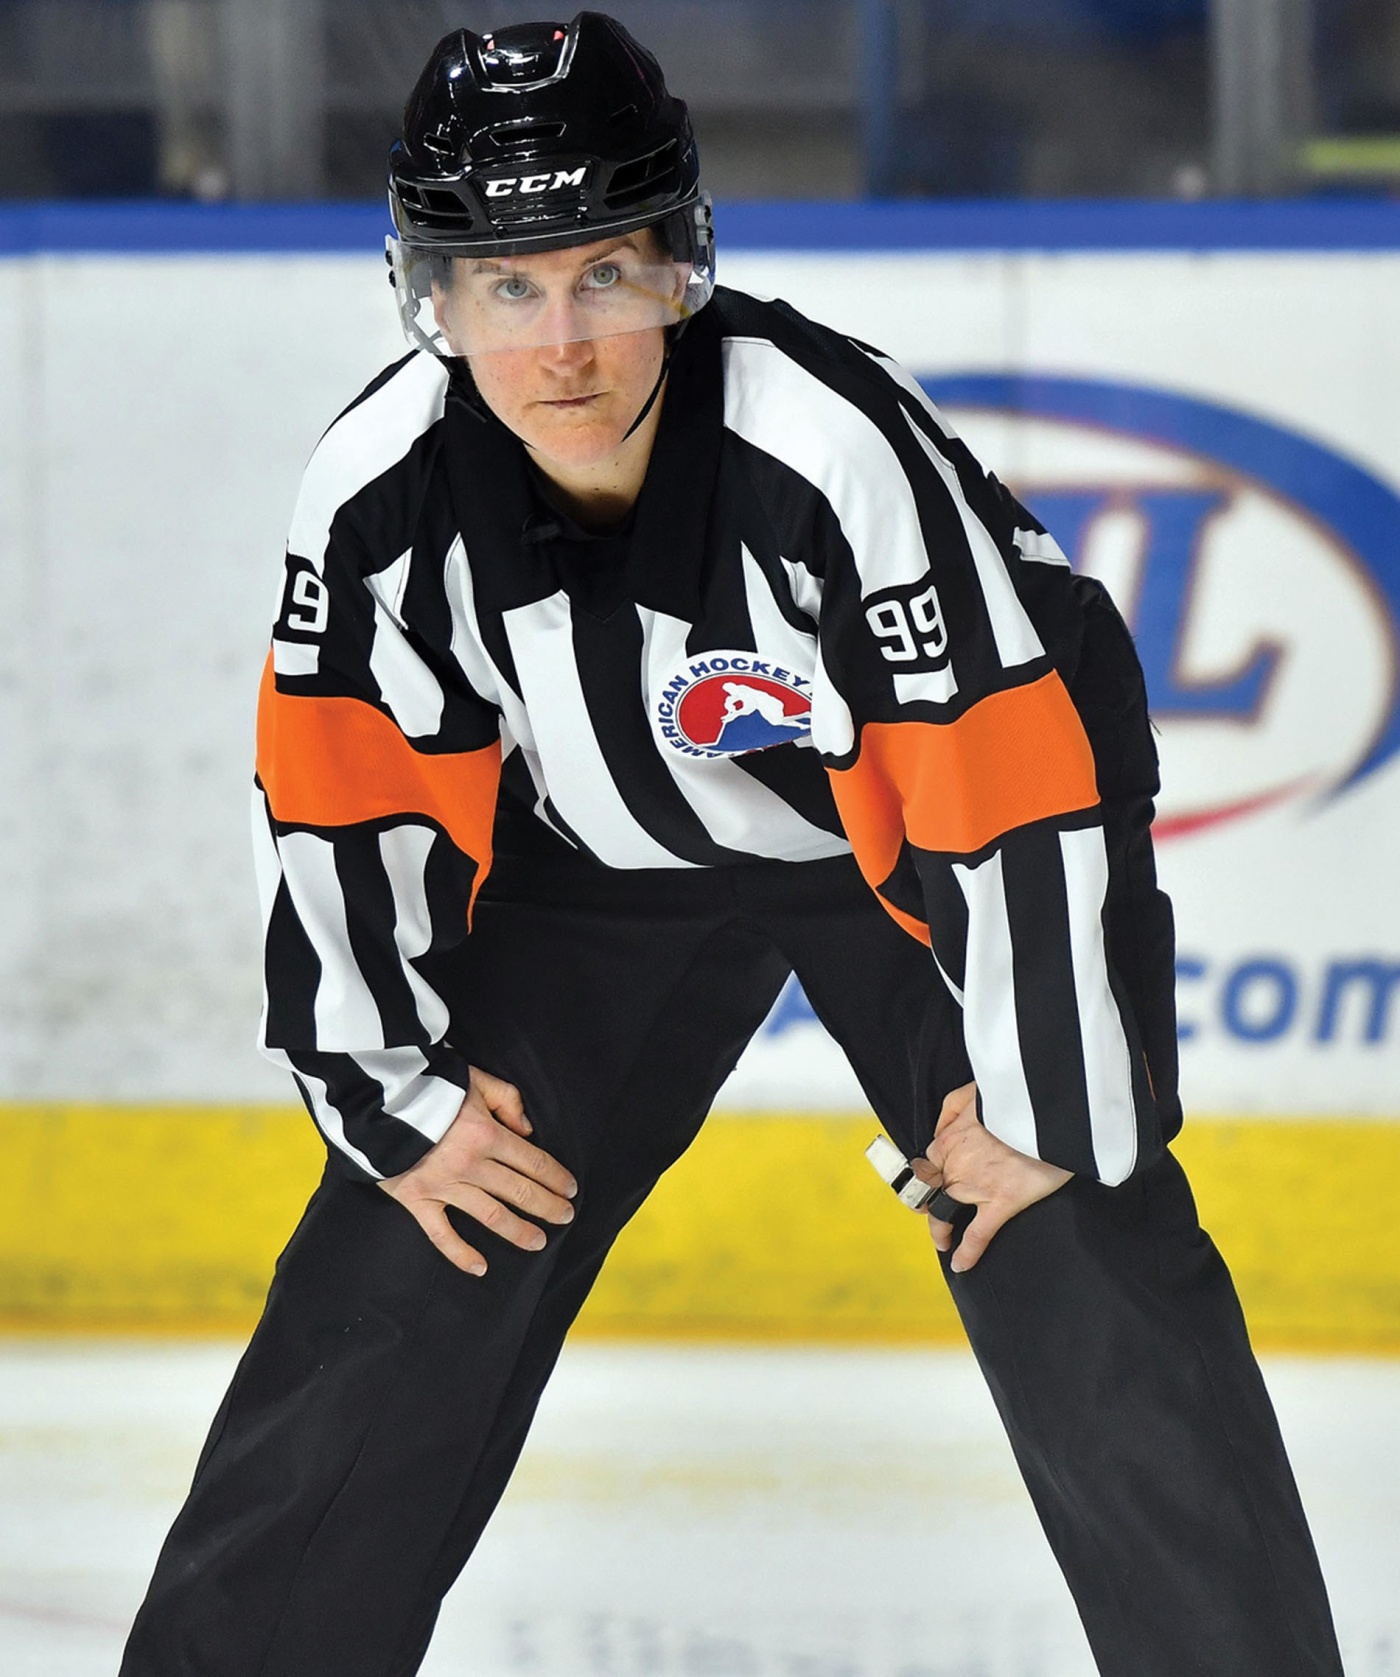 Image of referee Katie Guay on the ice